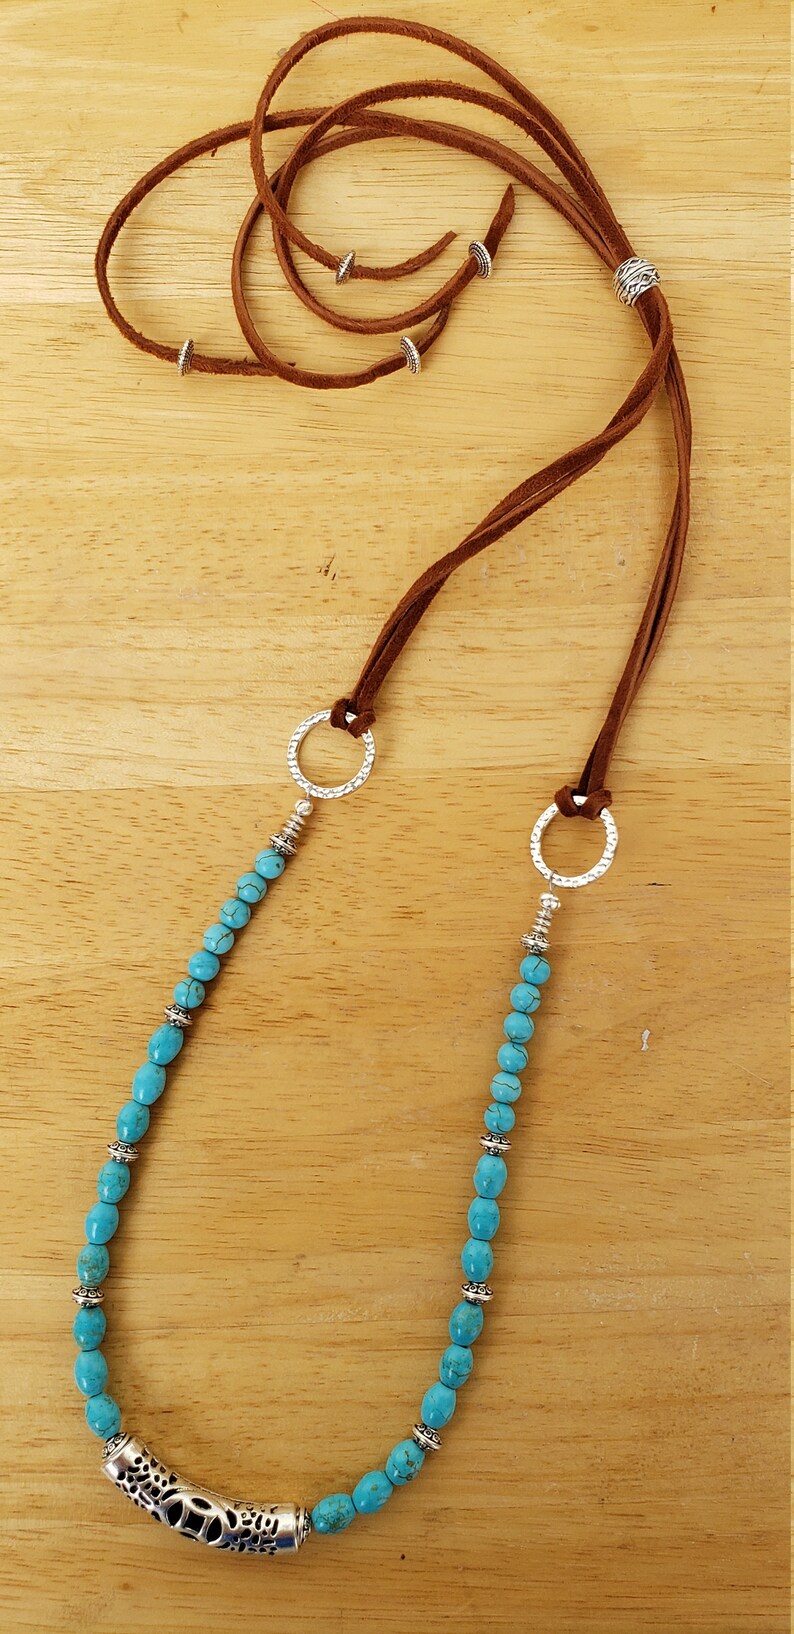 Handmade Center Bead Focal Point Adjustable Length Turquoise Color Beads Southwestern Style Leather Strap Necklace Pewter Bead Spacers